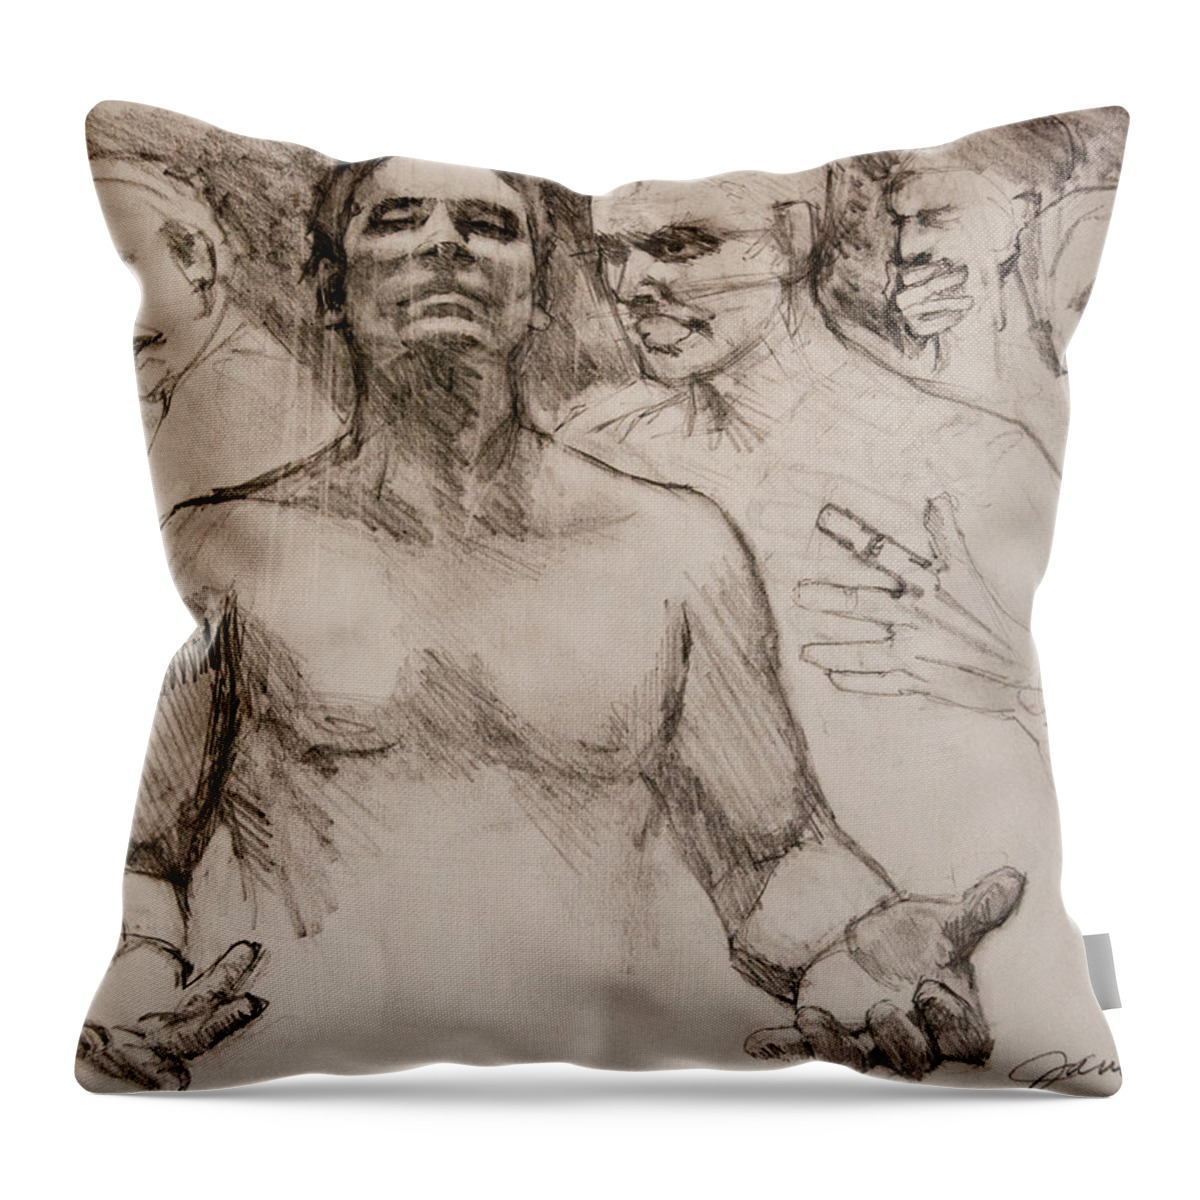 People Throw Pillow featuring the drawing Persecution Sketch by Jani Freimann